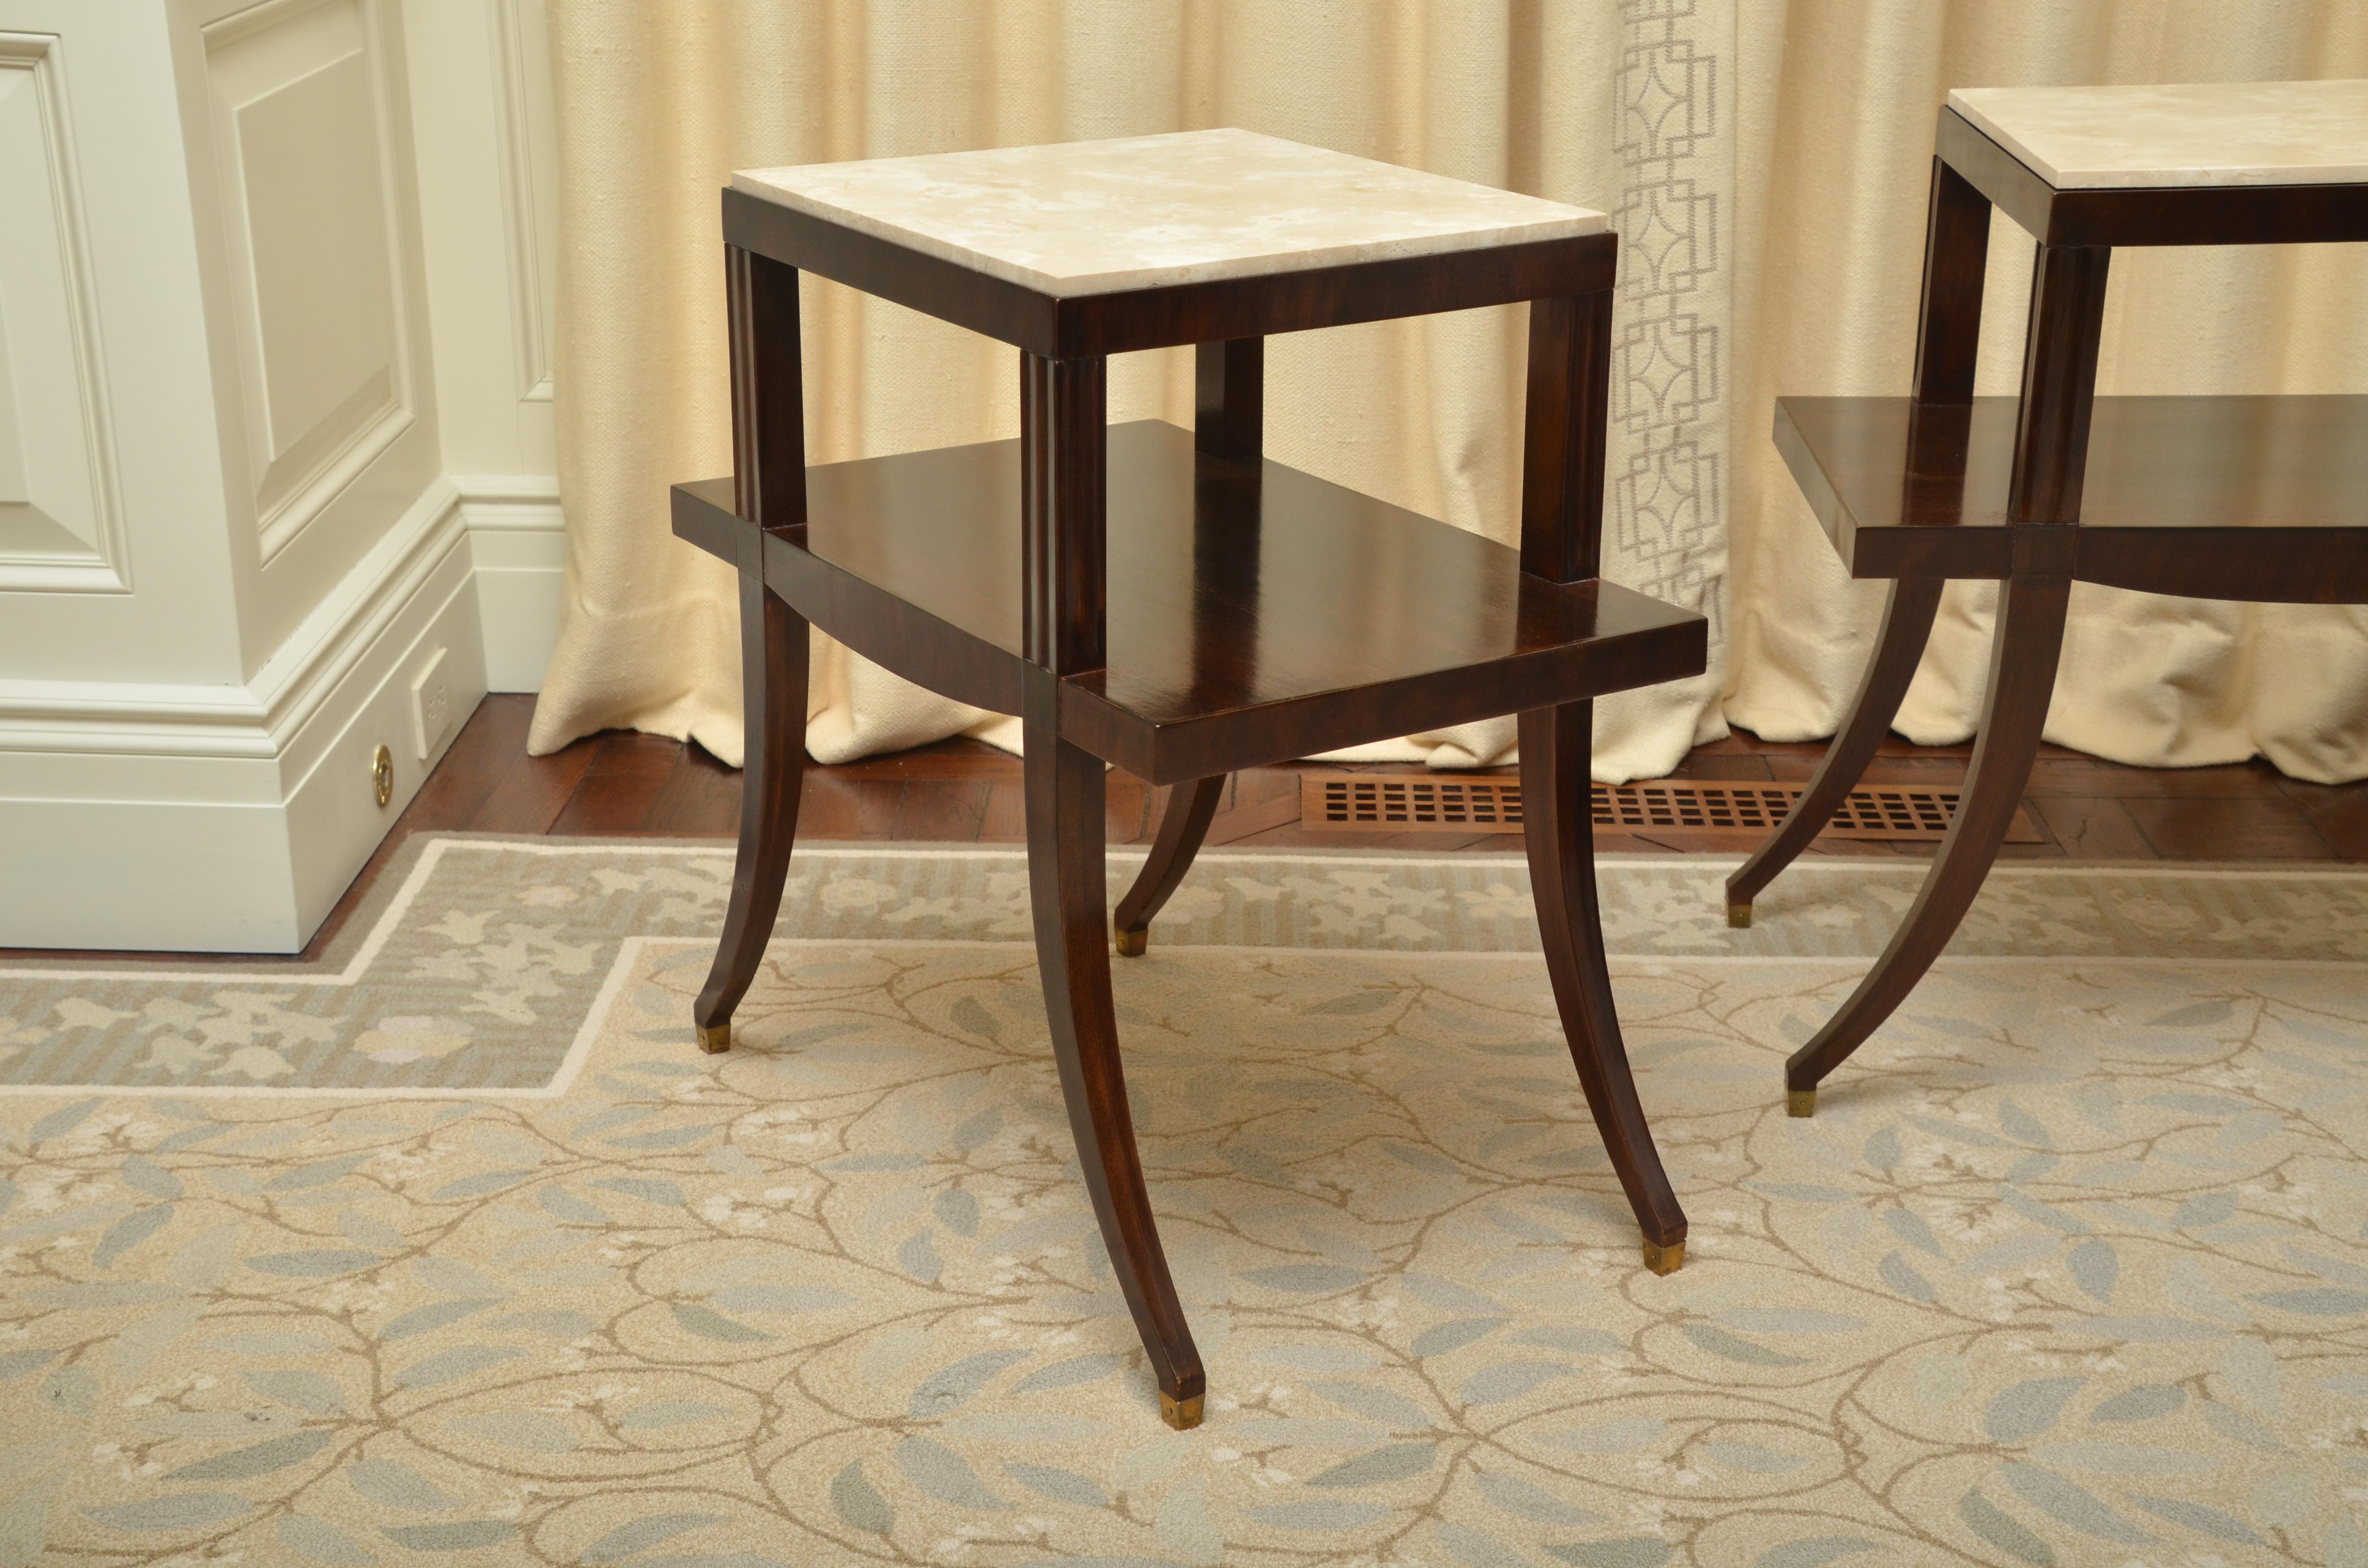 American Pair of Neoclassical Mahogany and Travertine Two-Tier Tables